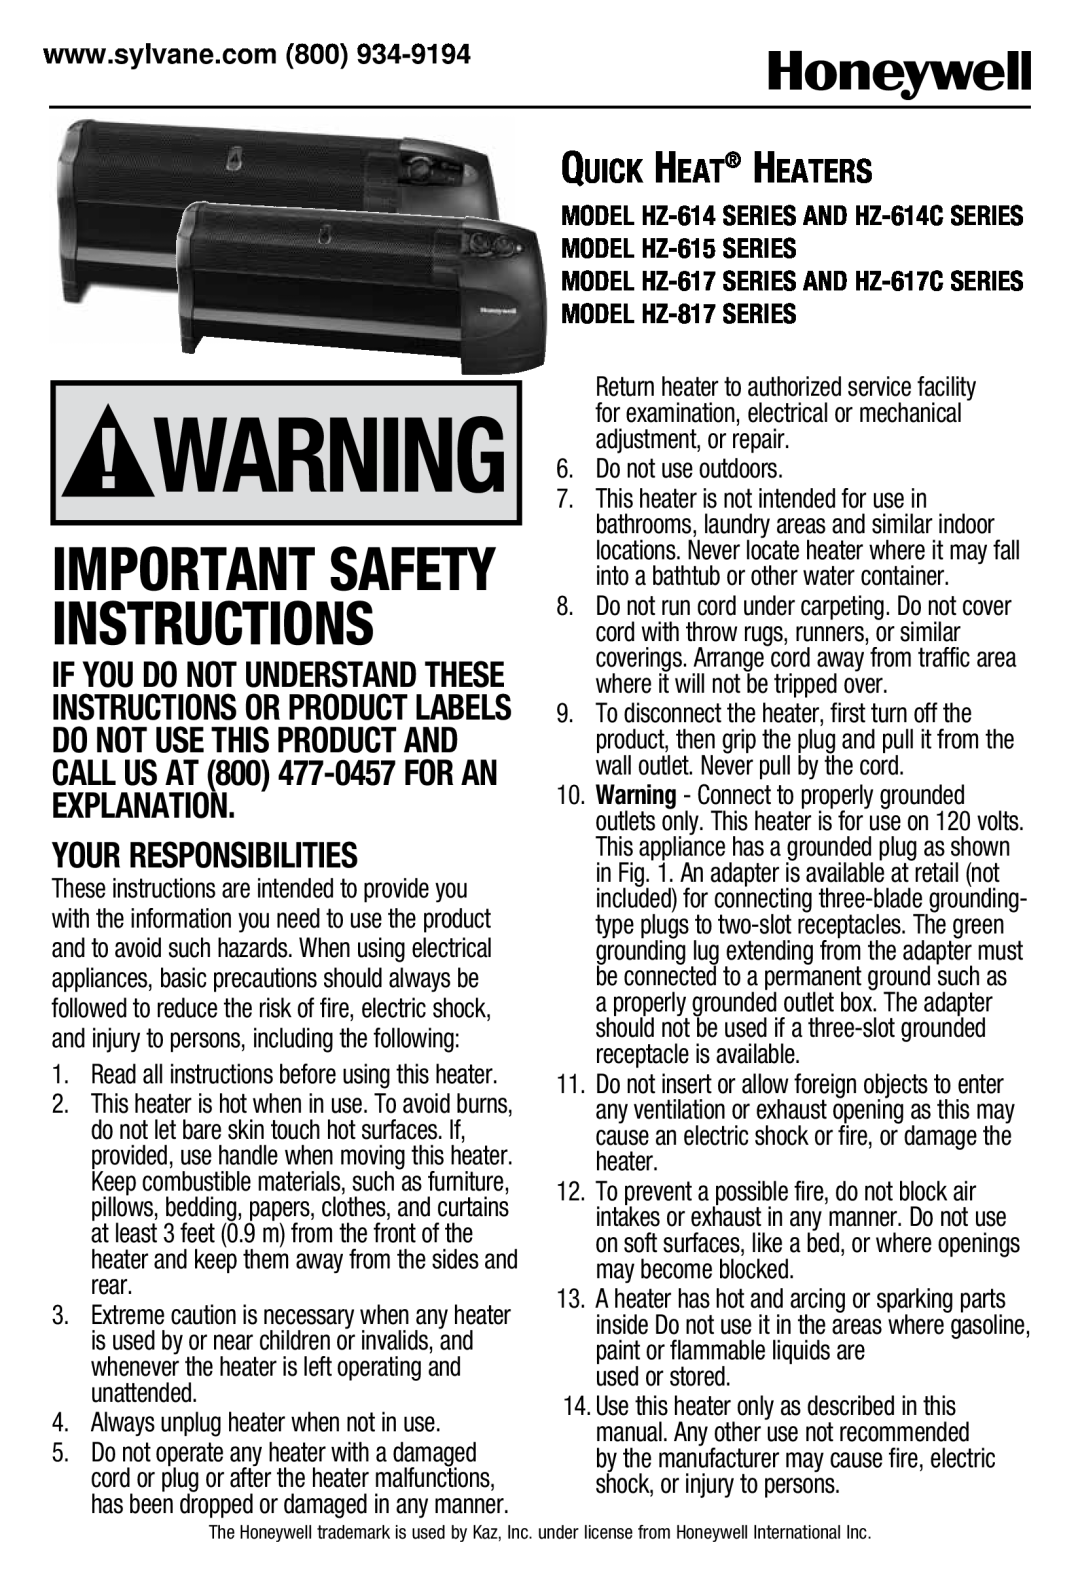 Honeywell HZ-615 important safety instructions Your Responsibilities, Quick Heat Heaters, Important Safety Instructions 